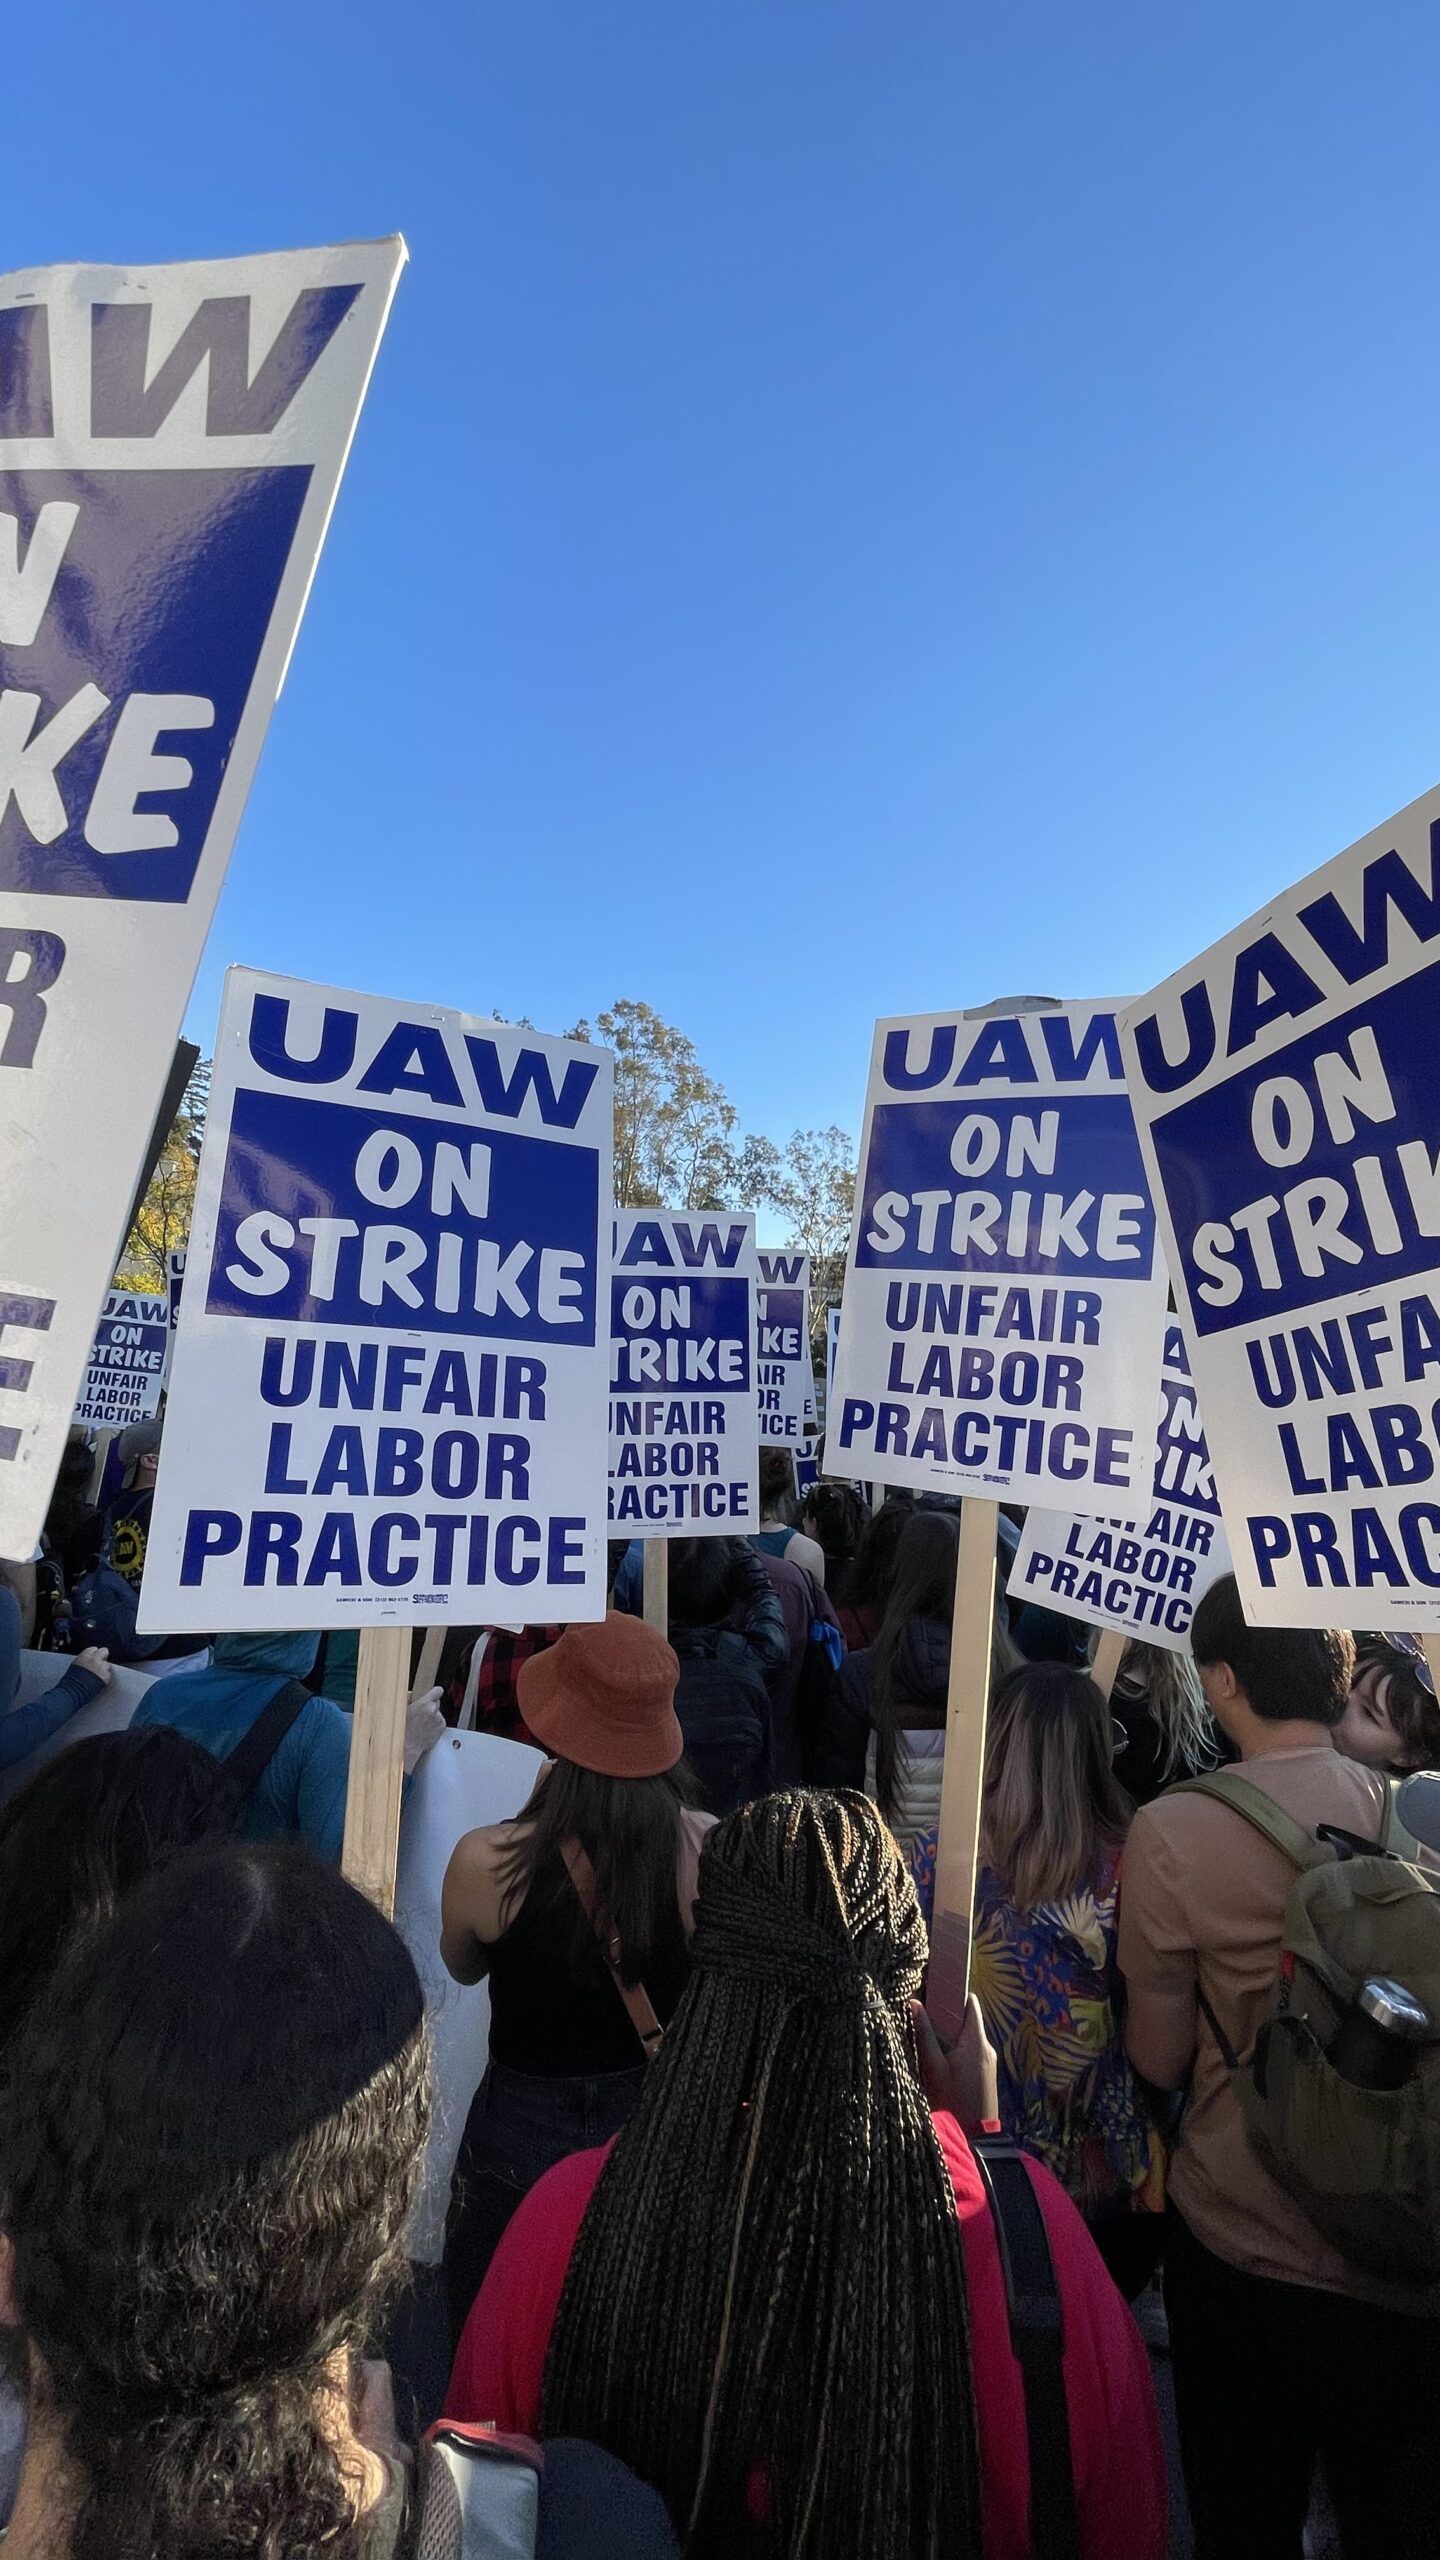 Photos of UAW academic workers on strike via Wikimedia Commons Pillsmarch, CC BY-SA 4.0